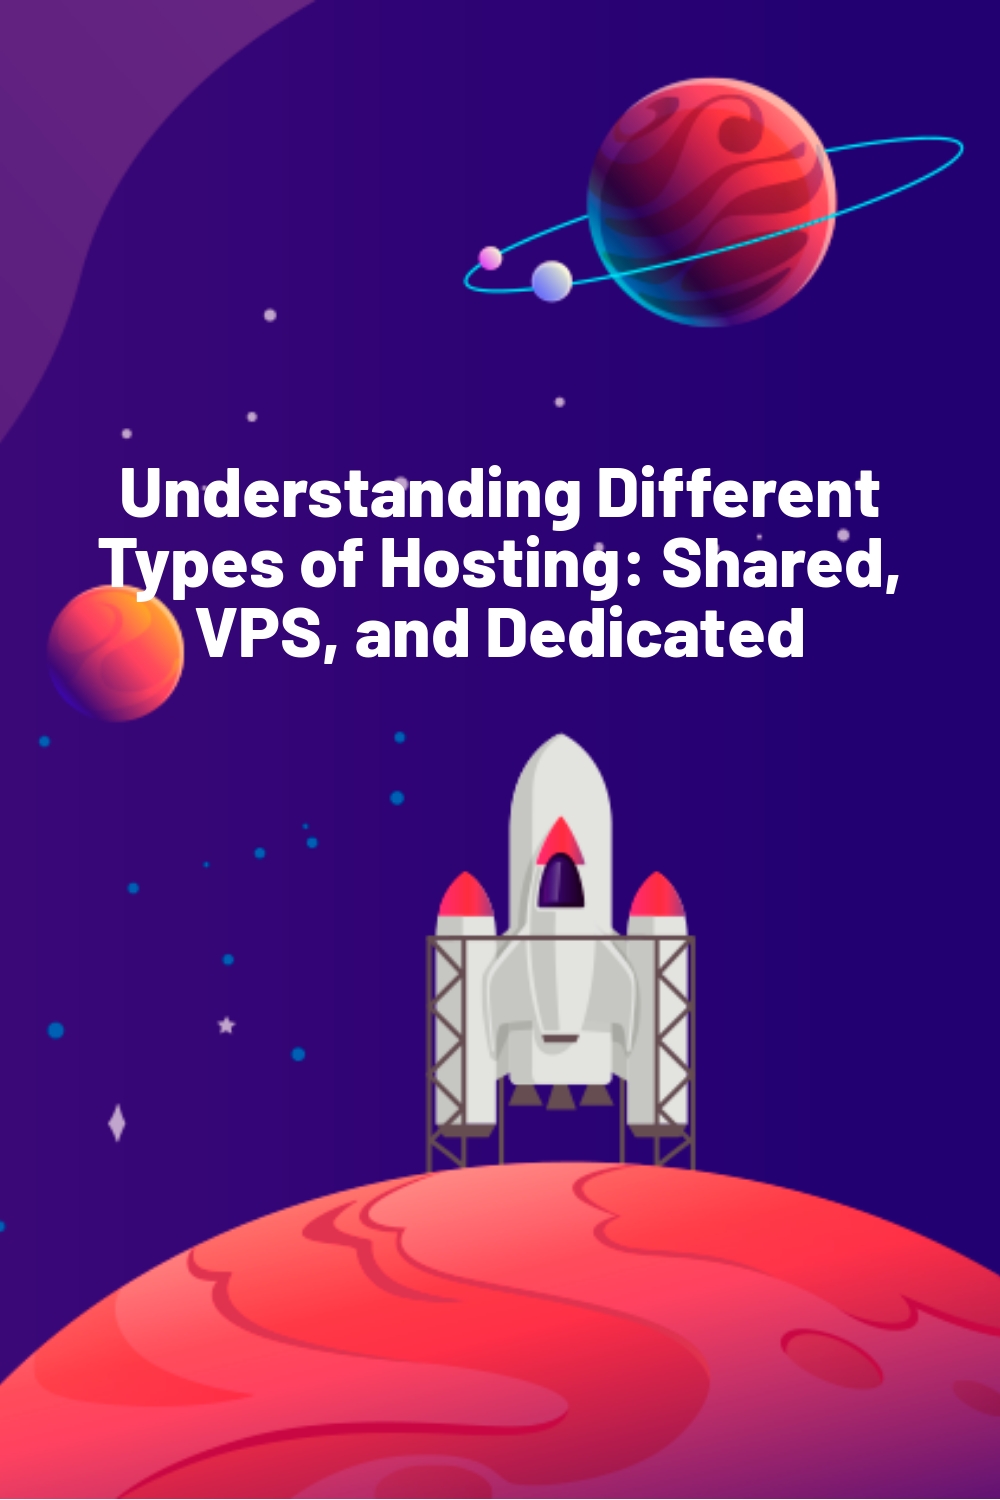 Understanding Different Types of Hosting: Shared, VPS, and Dedicated